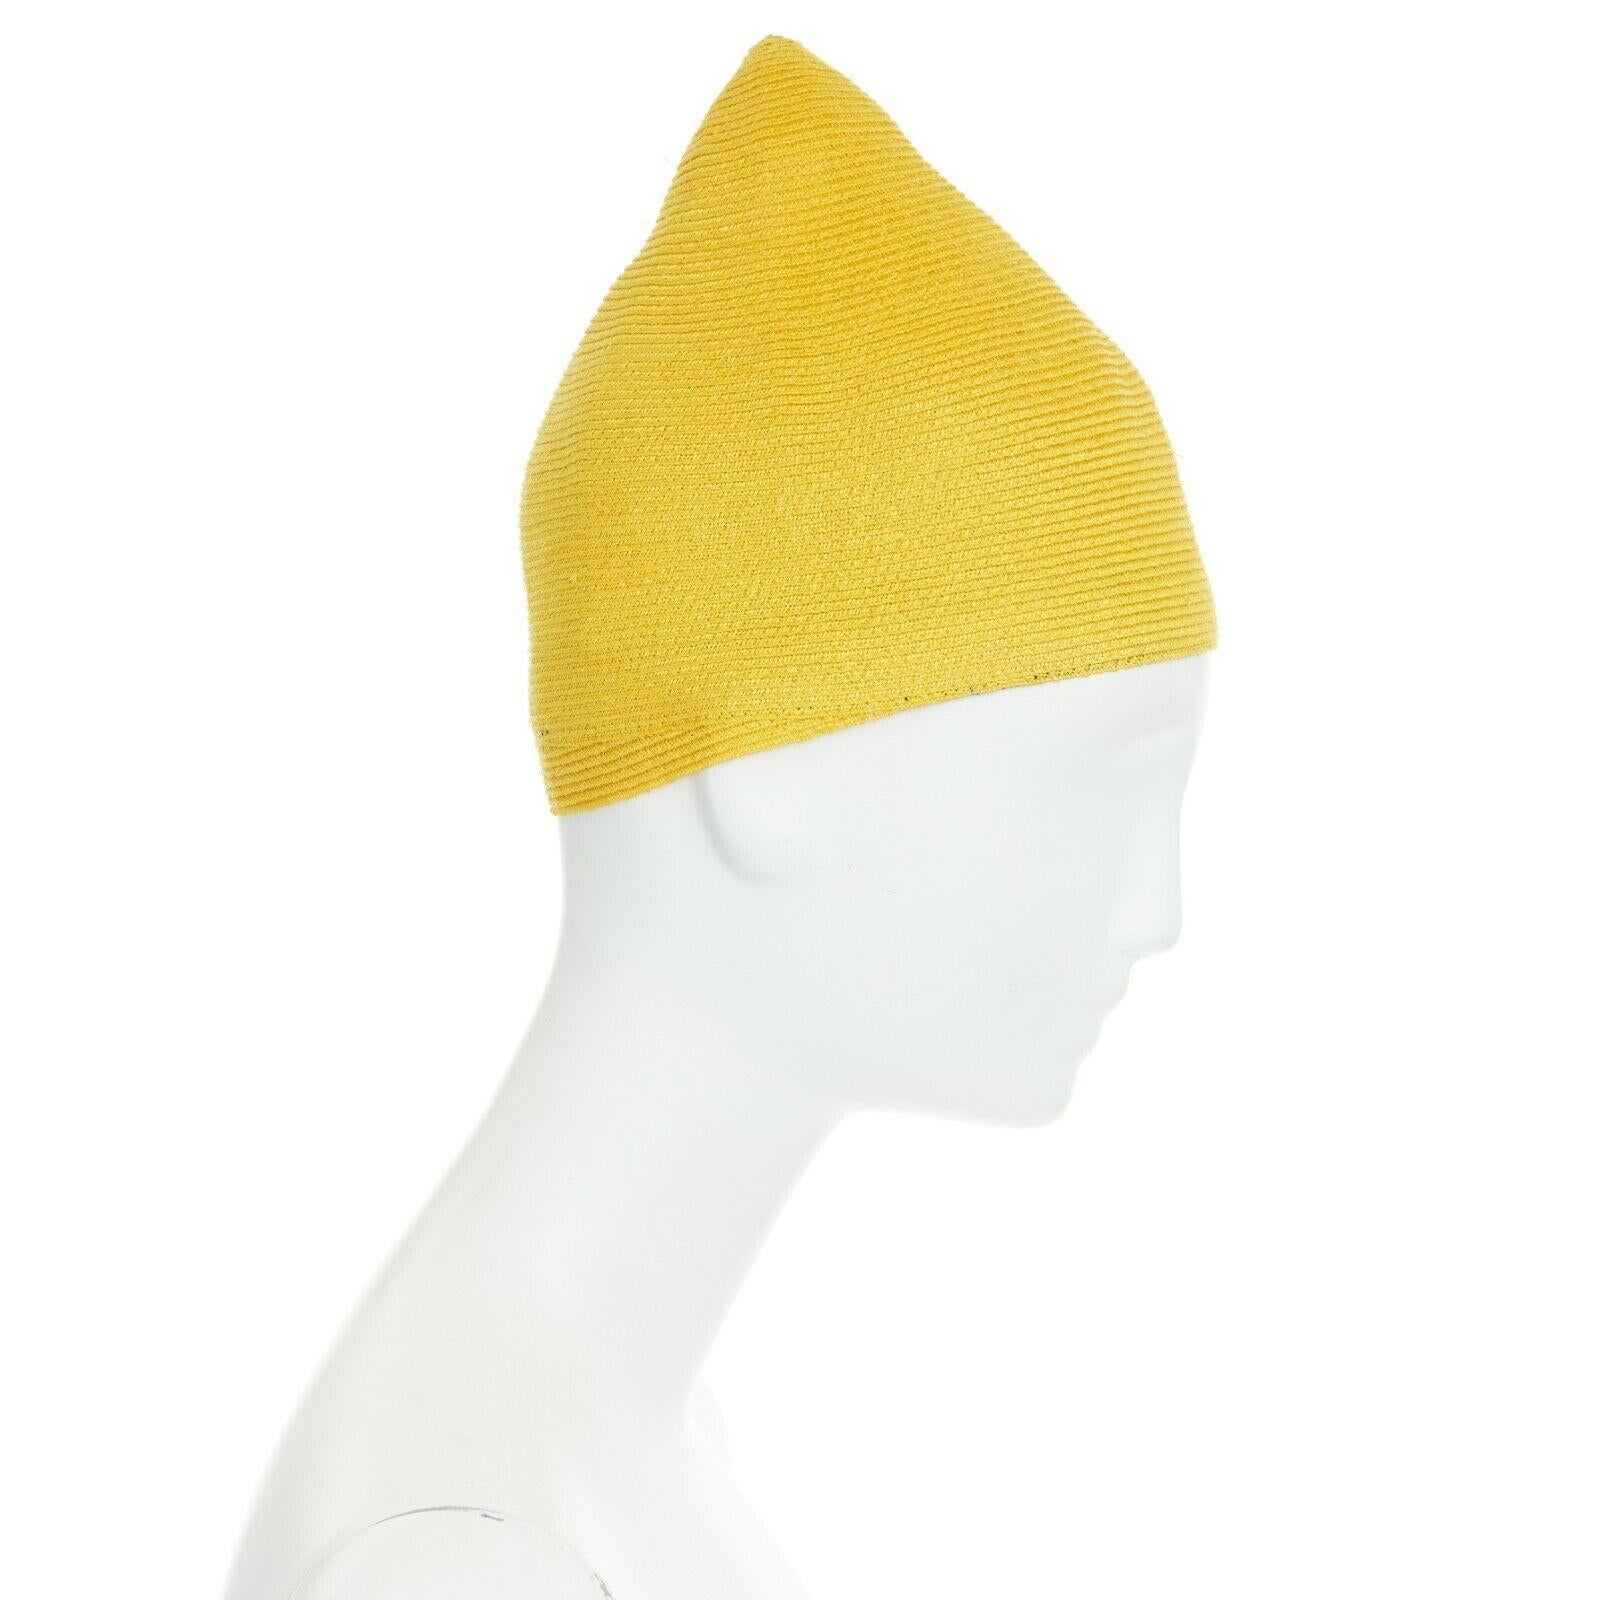 yellow pointy hat